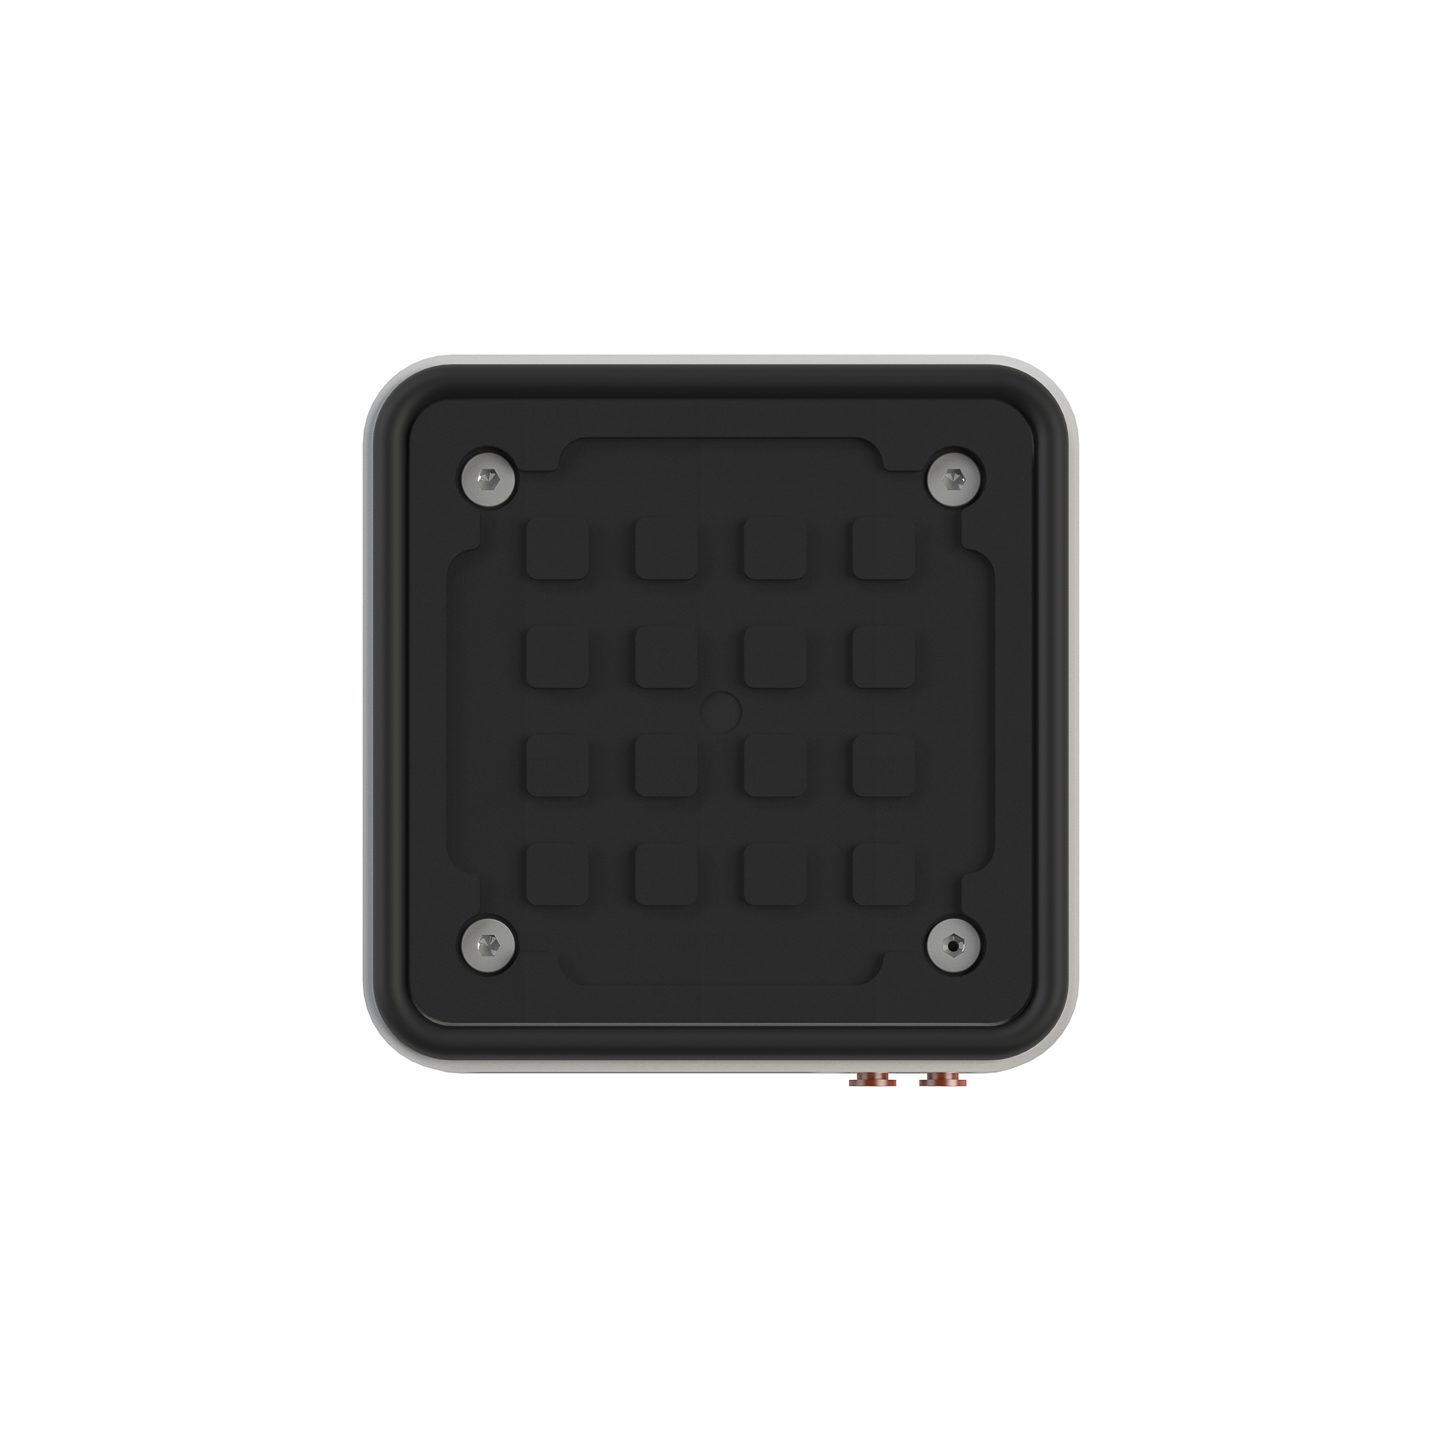 200 x 200 mm Low-Profile Suction Cup by Blick industries